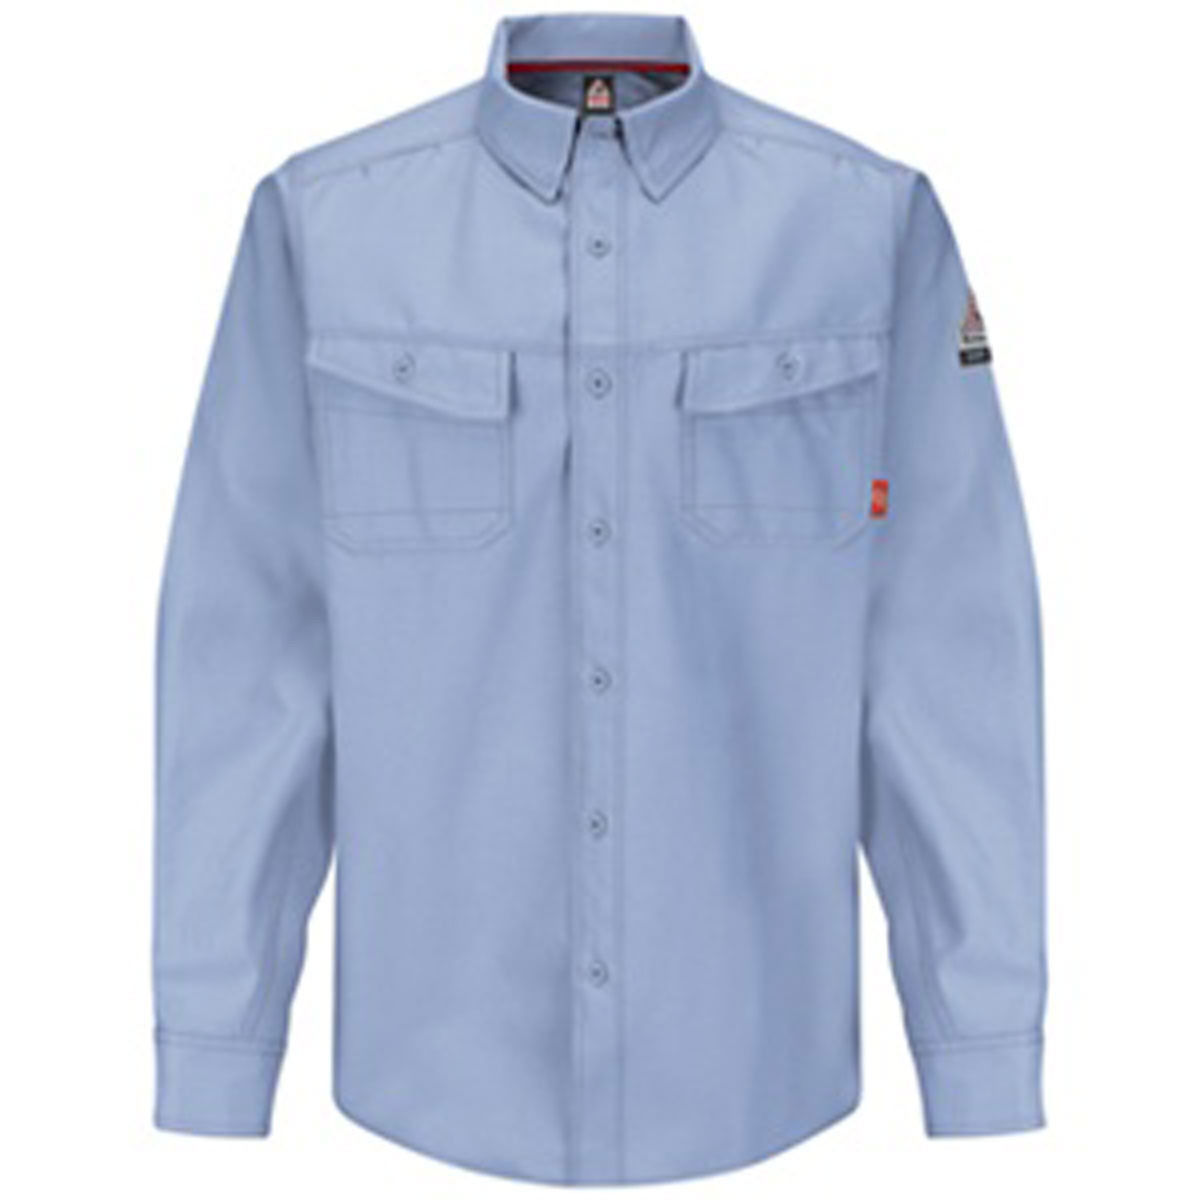 Does the Bulwark iQ Series QS40LB FR Men's Work Shirt comply with NFPA® 2112 standards?